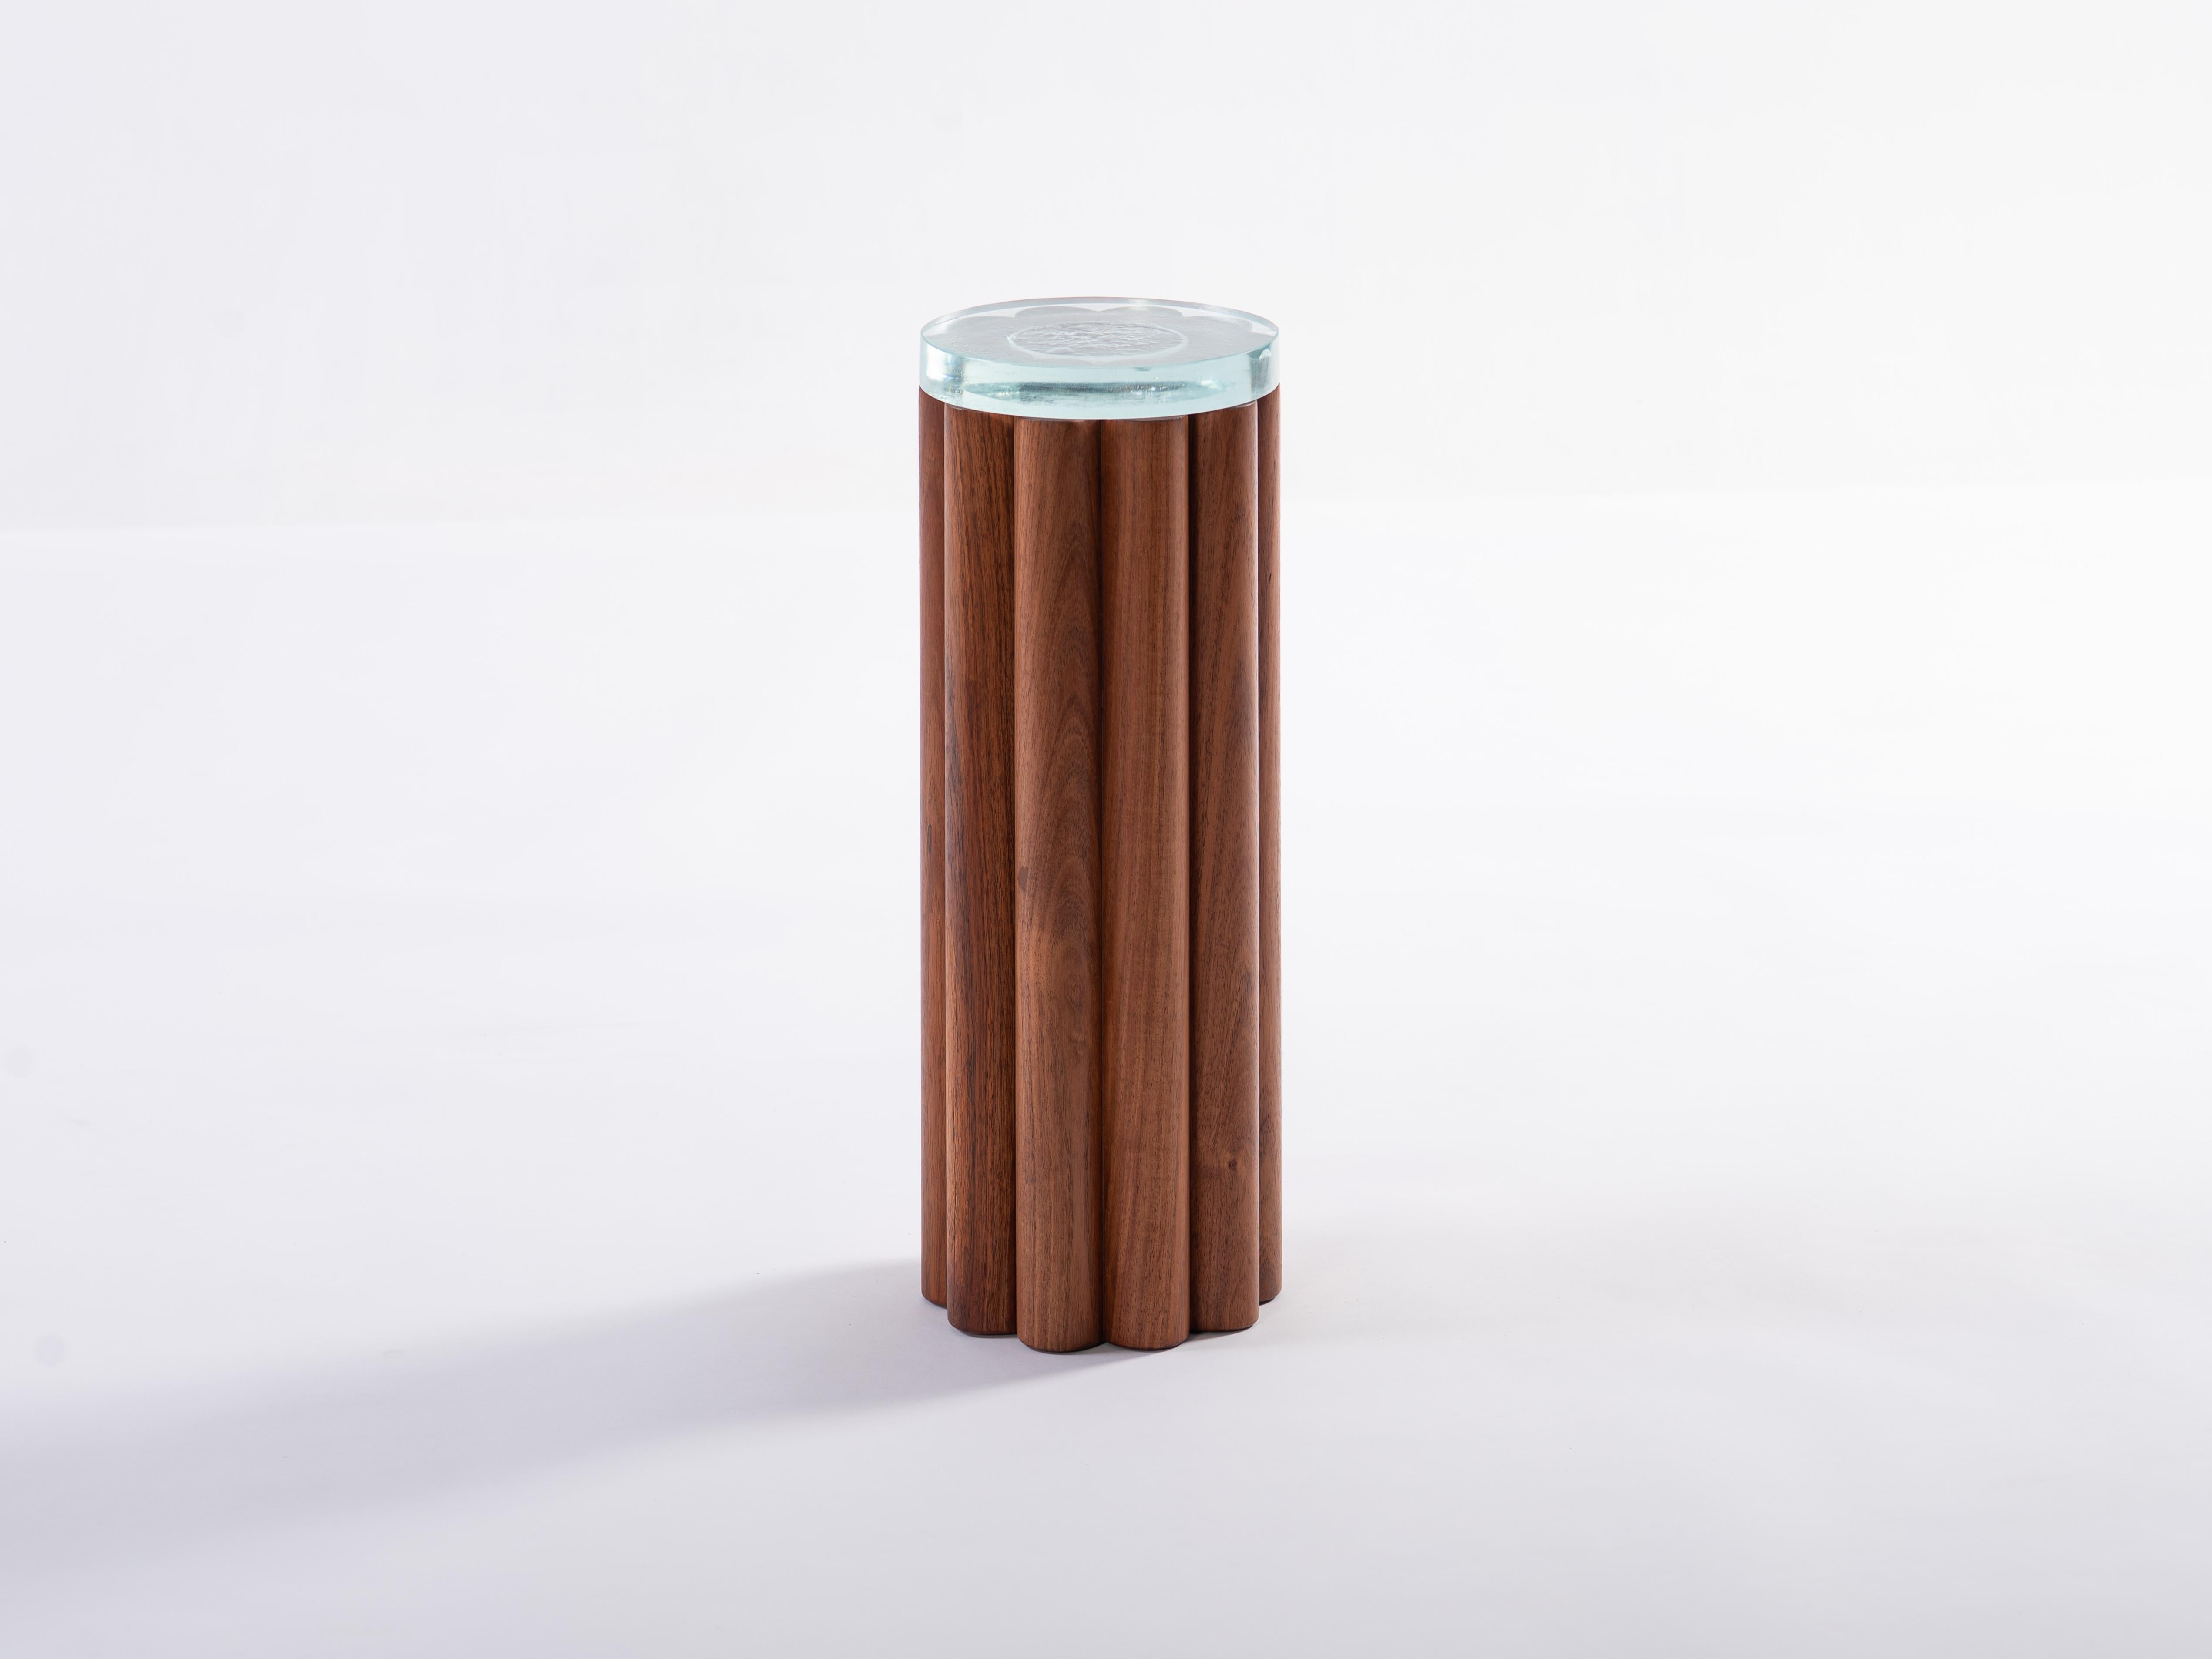 What started with an exploration using turned wooden rods and the right amount of curiosity-playing around with the possibilities of the cylindrical shapes and the use of positive/negative shapes-became the expressive essence of our Loto collection.